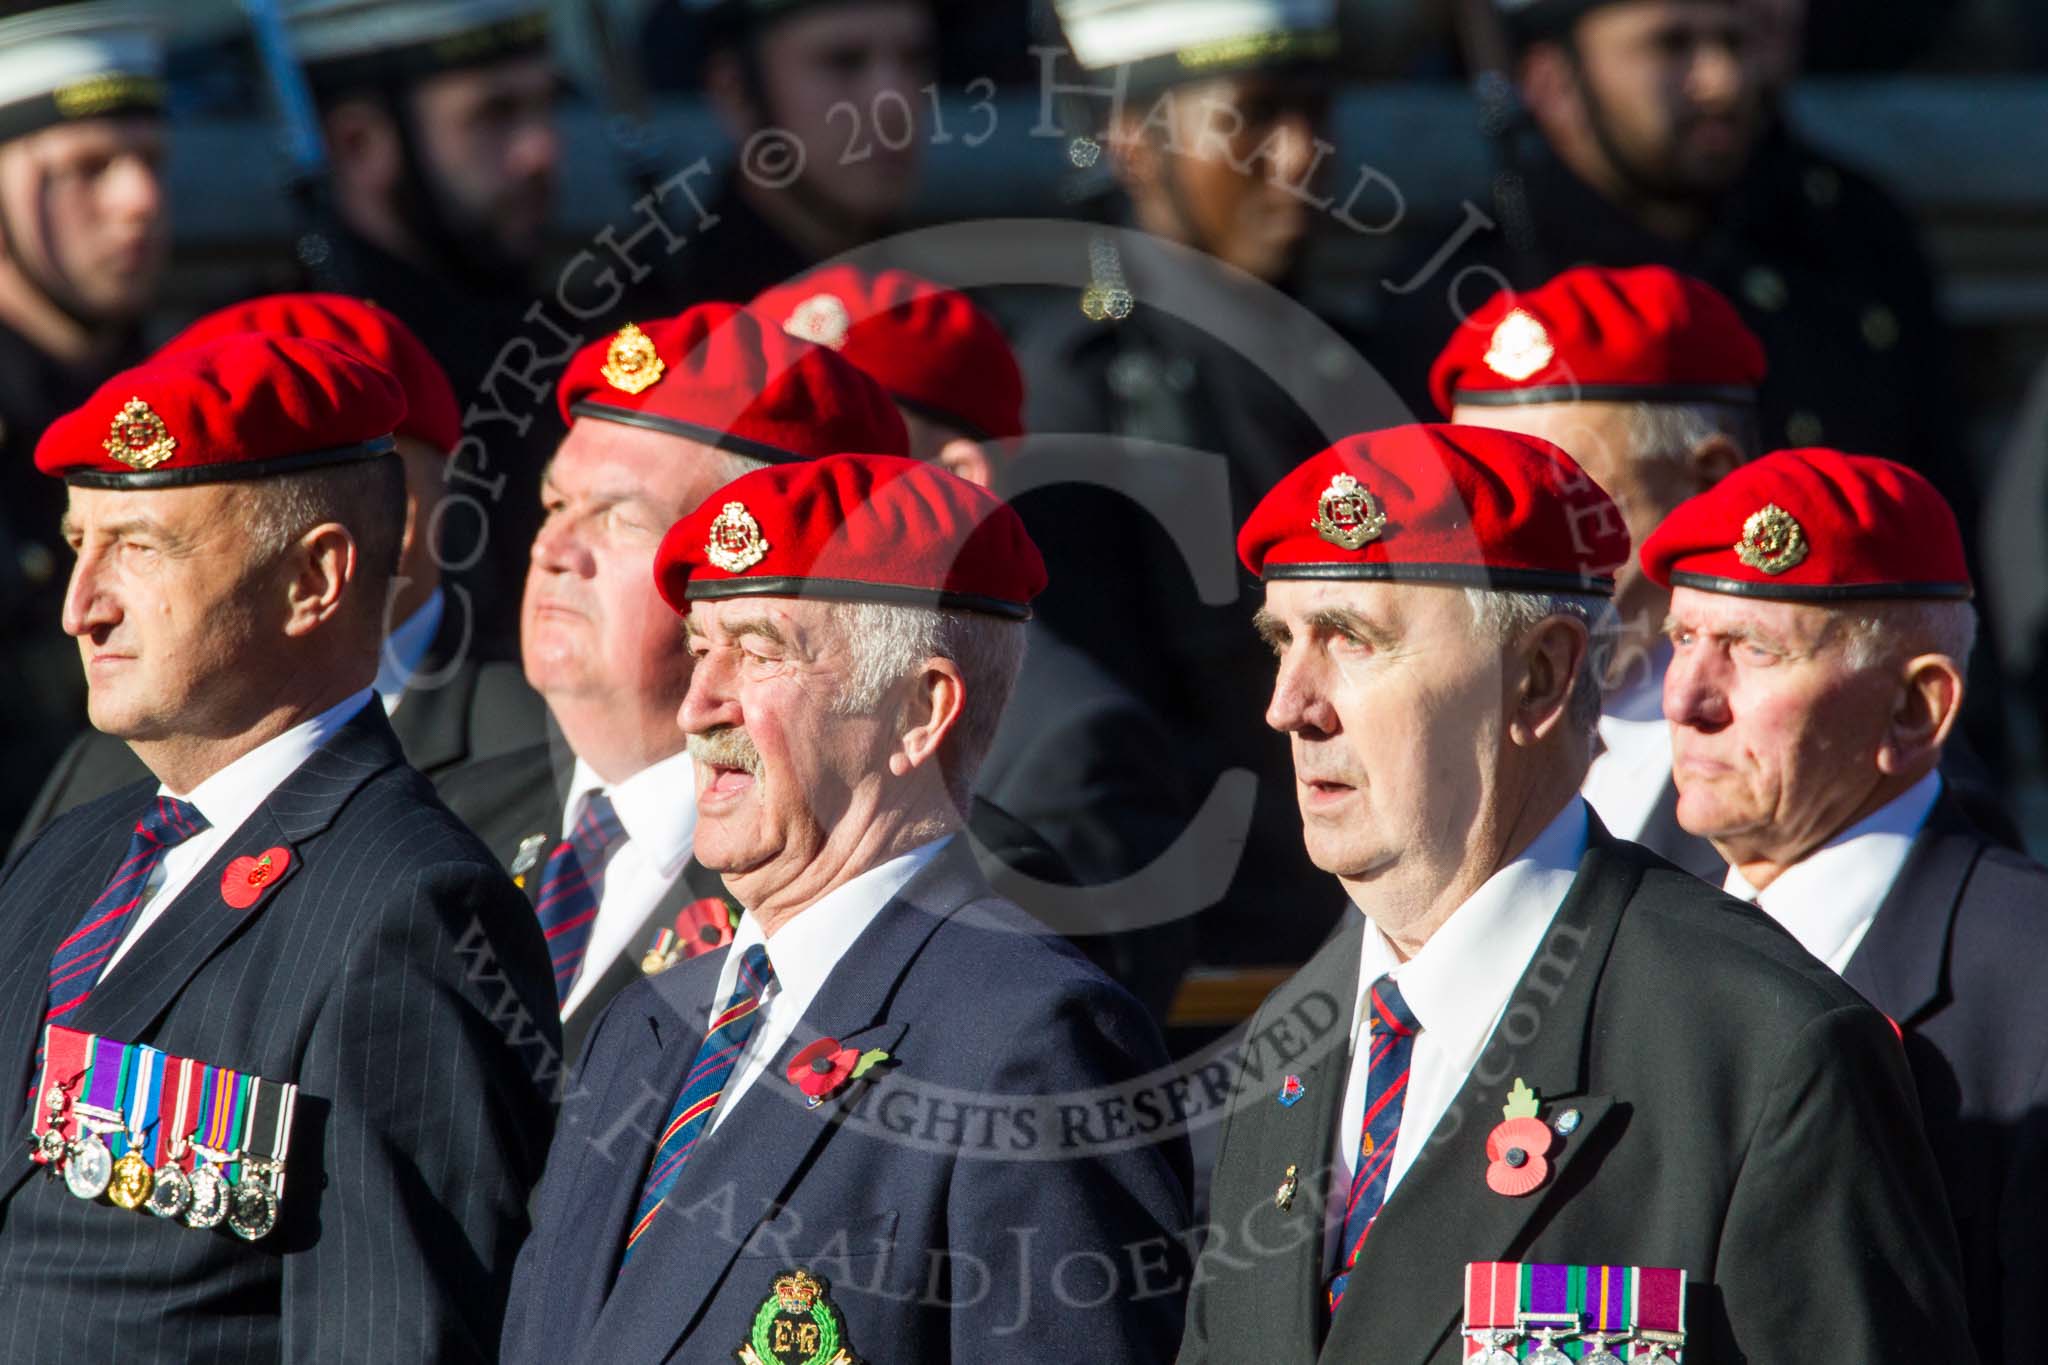 Remembrance Sunday at the Cenotaph in London 2014: Group B20 - Royal Military Police Association.
Press stand opposite the Foreign Office building, Whitehall, London SW1,
London,
Greater London,
United Kingdom,
on 09 November 2014 at 12:11, image #1738